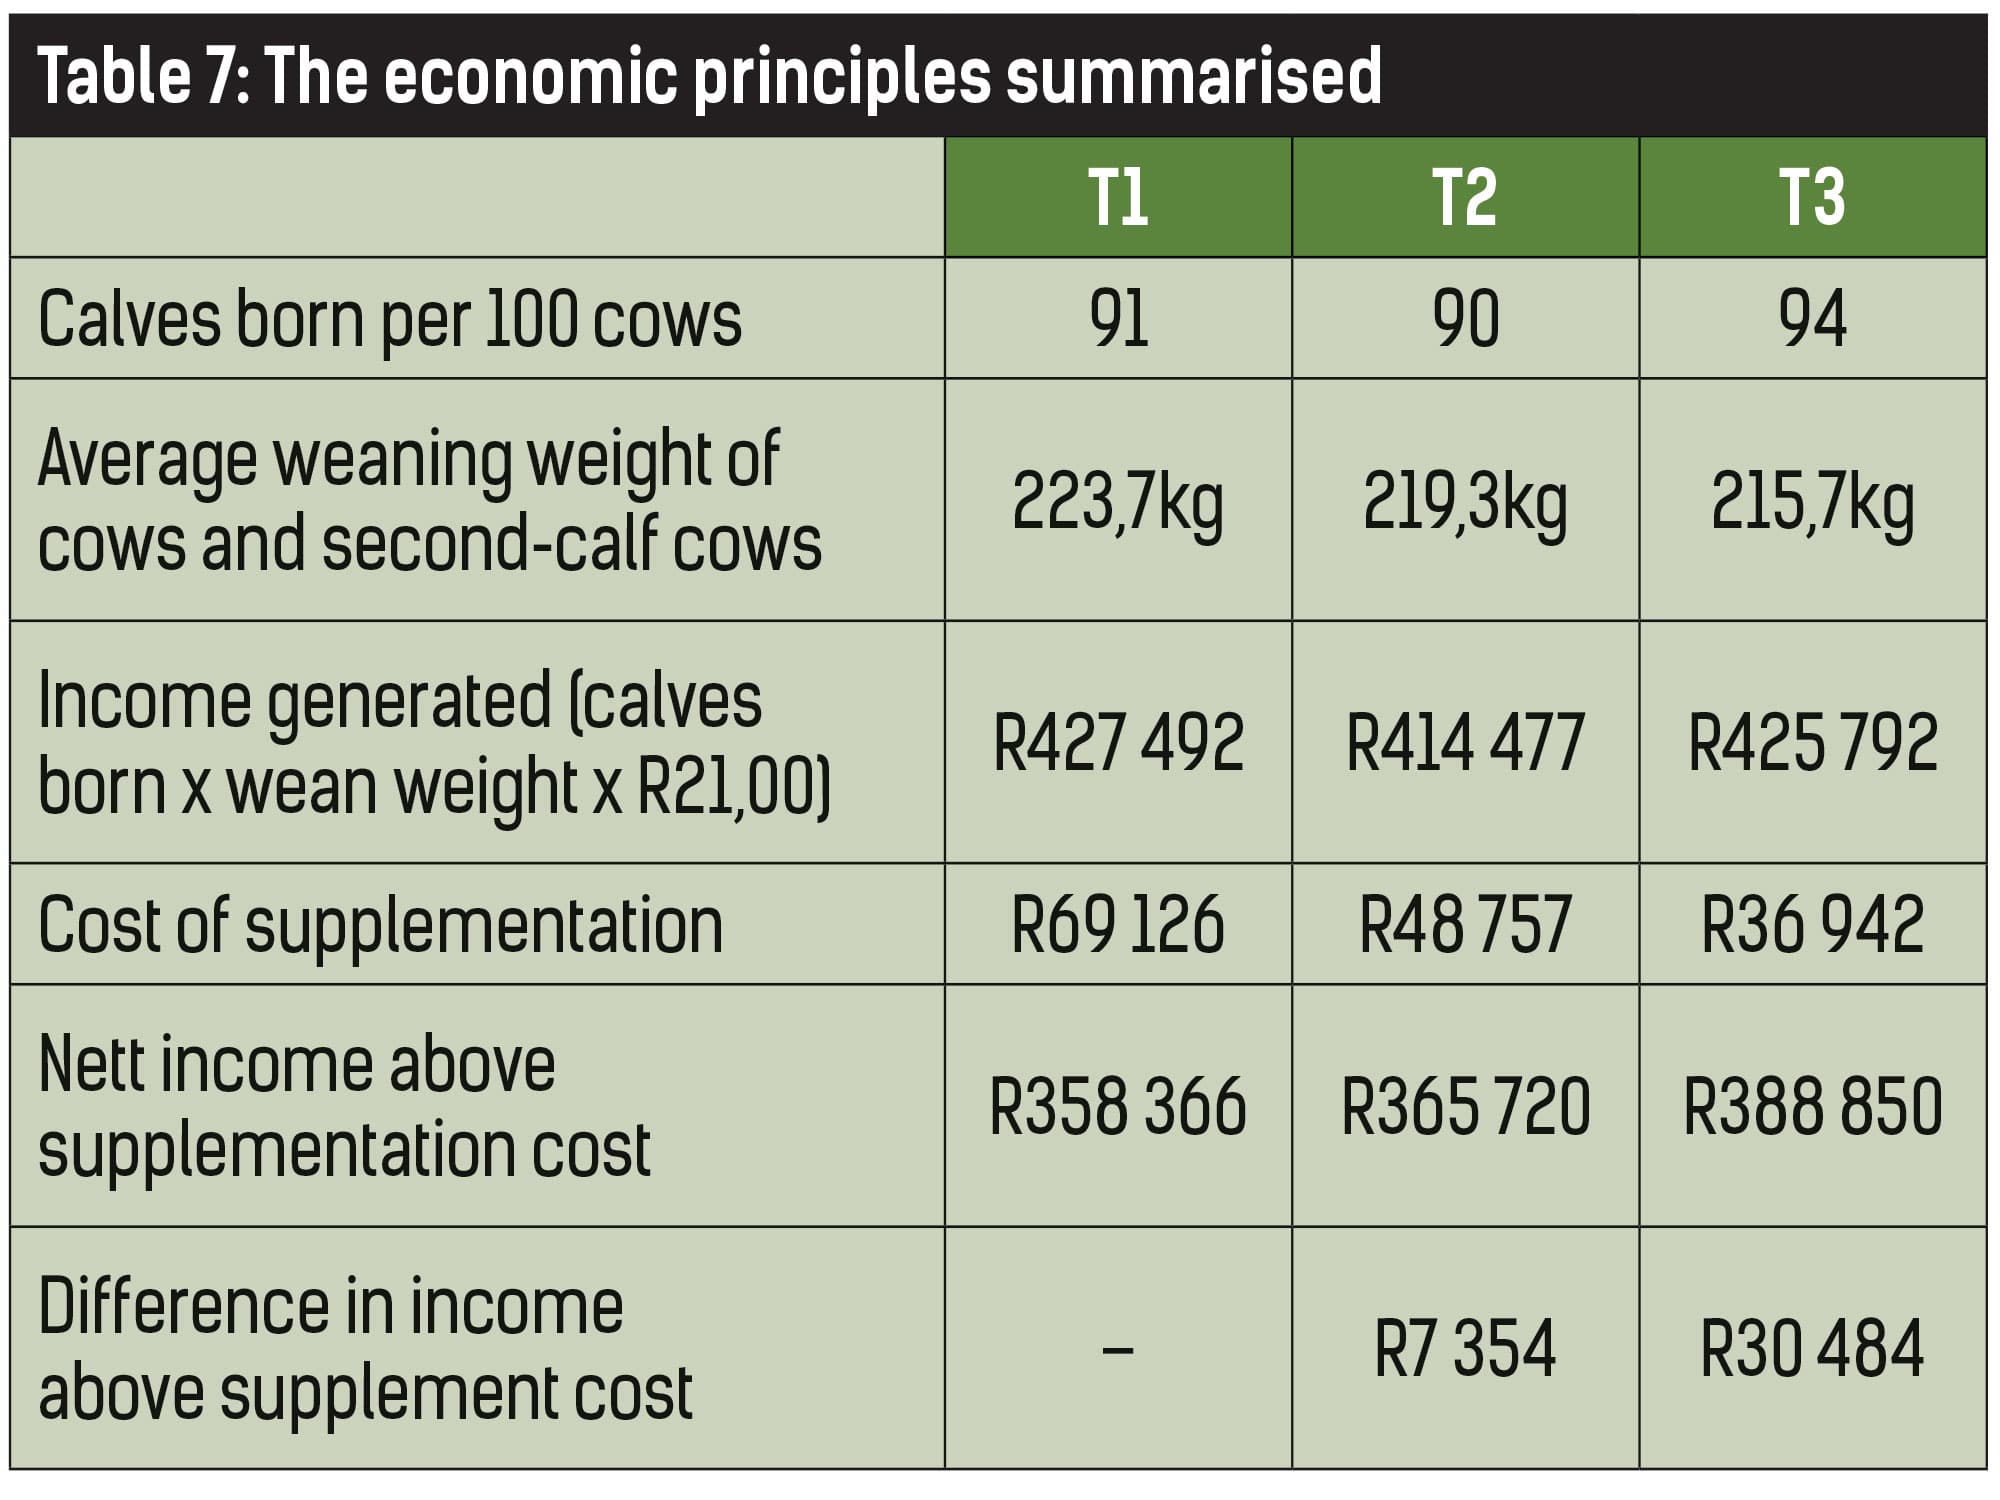 TABLE 6: The mean (± SD) for birthweight (kg), 100-day weight (kg) and weaning weight (kg) of the calves, as well as cow weight at weaning. The intercalving period (ICP) (days) and conception rate (%) of each supplementation treatment group is also given.